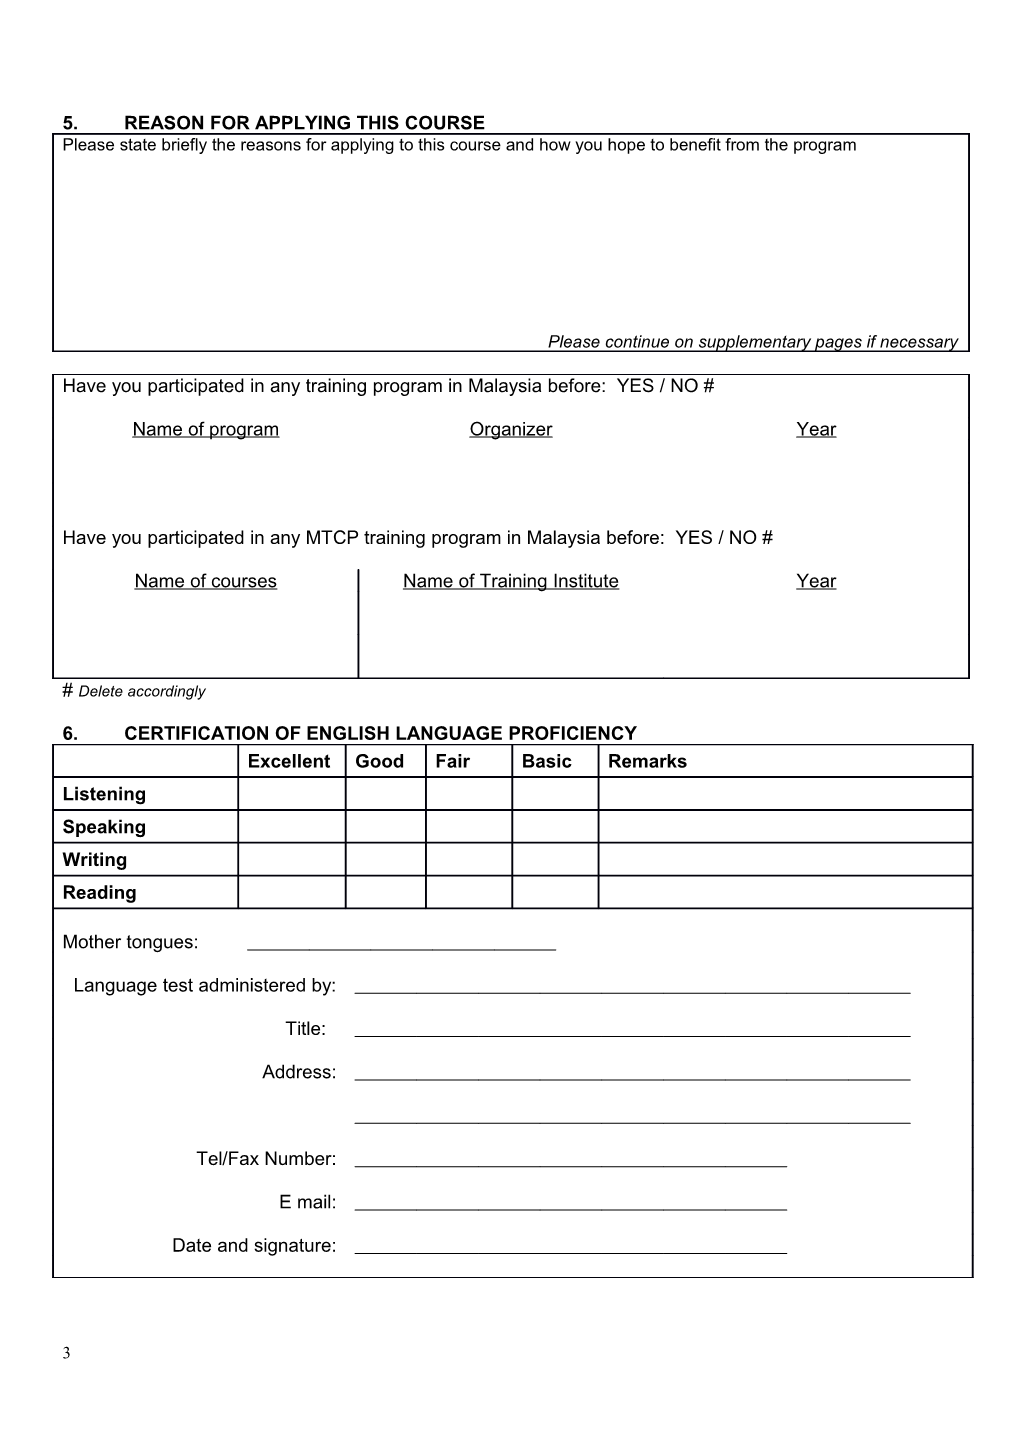 APPLICATION FORM (Typewriting Or Block Letters)